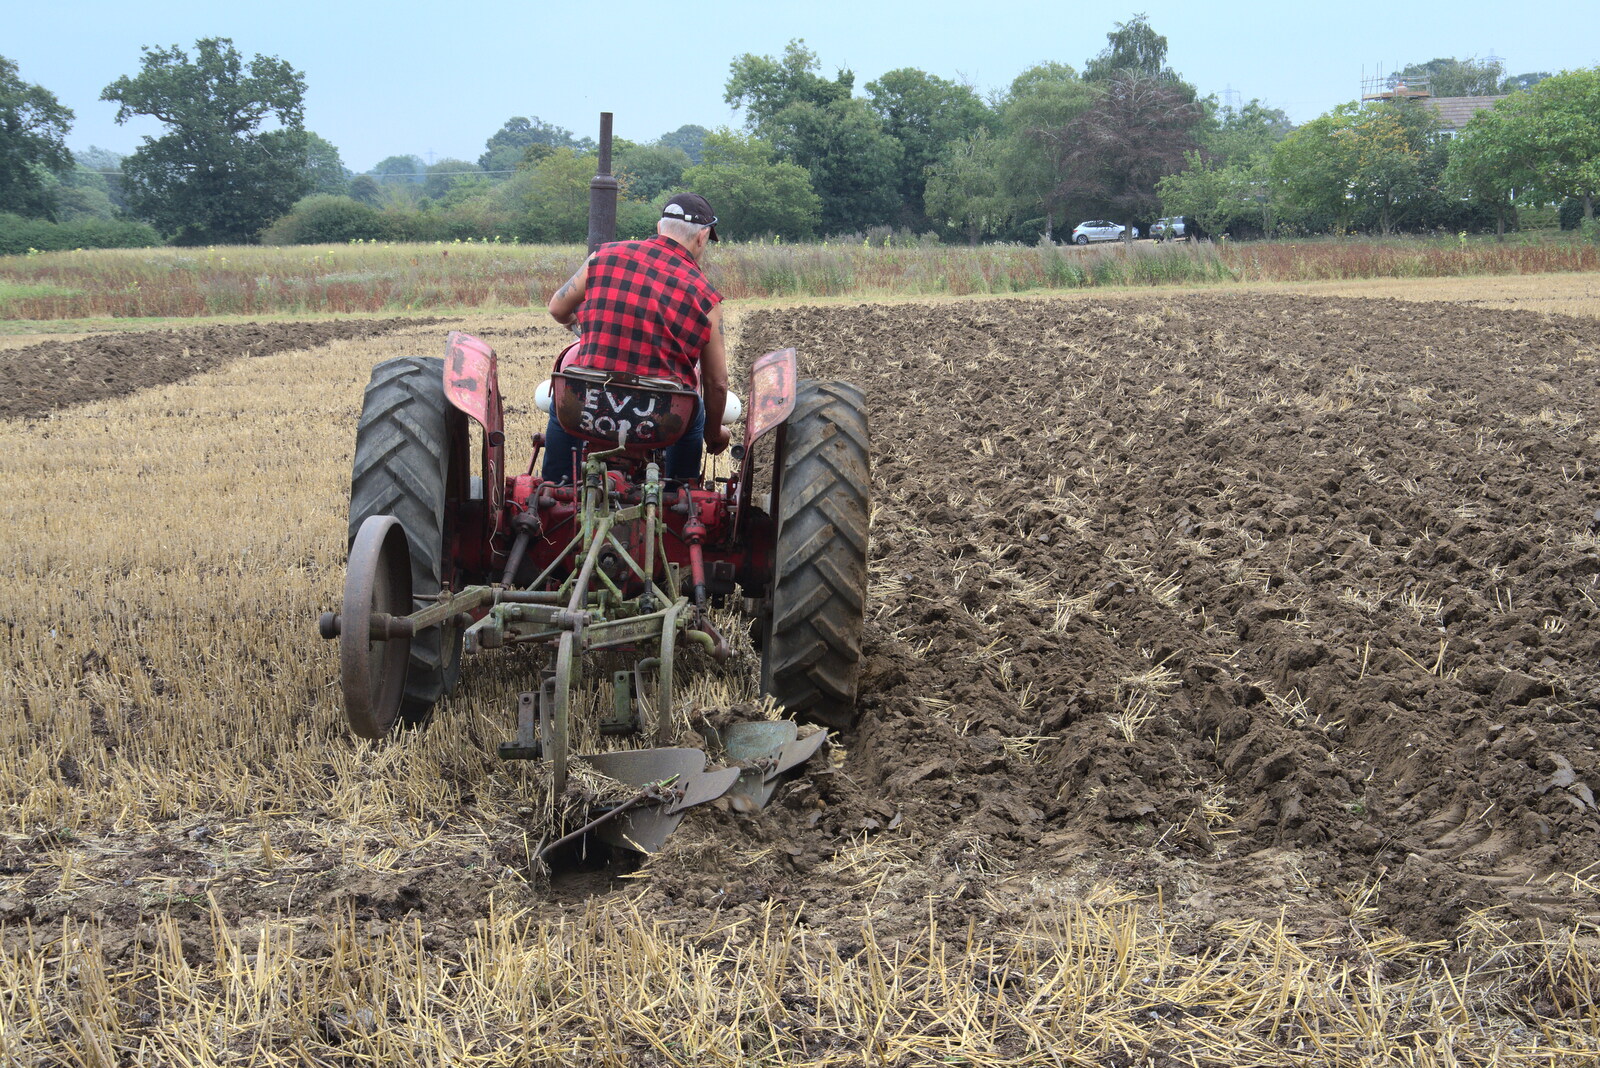 Vintage Tractor Ploughing, Thrandeston, Suffolk - 26th September 2021: Another run up the field